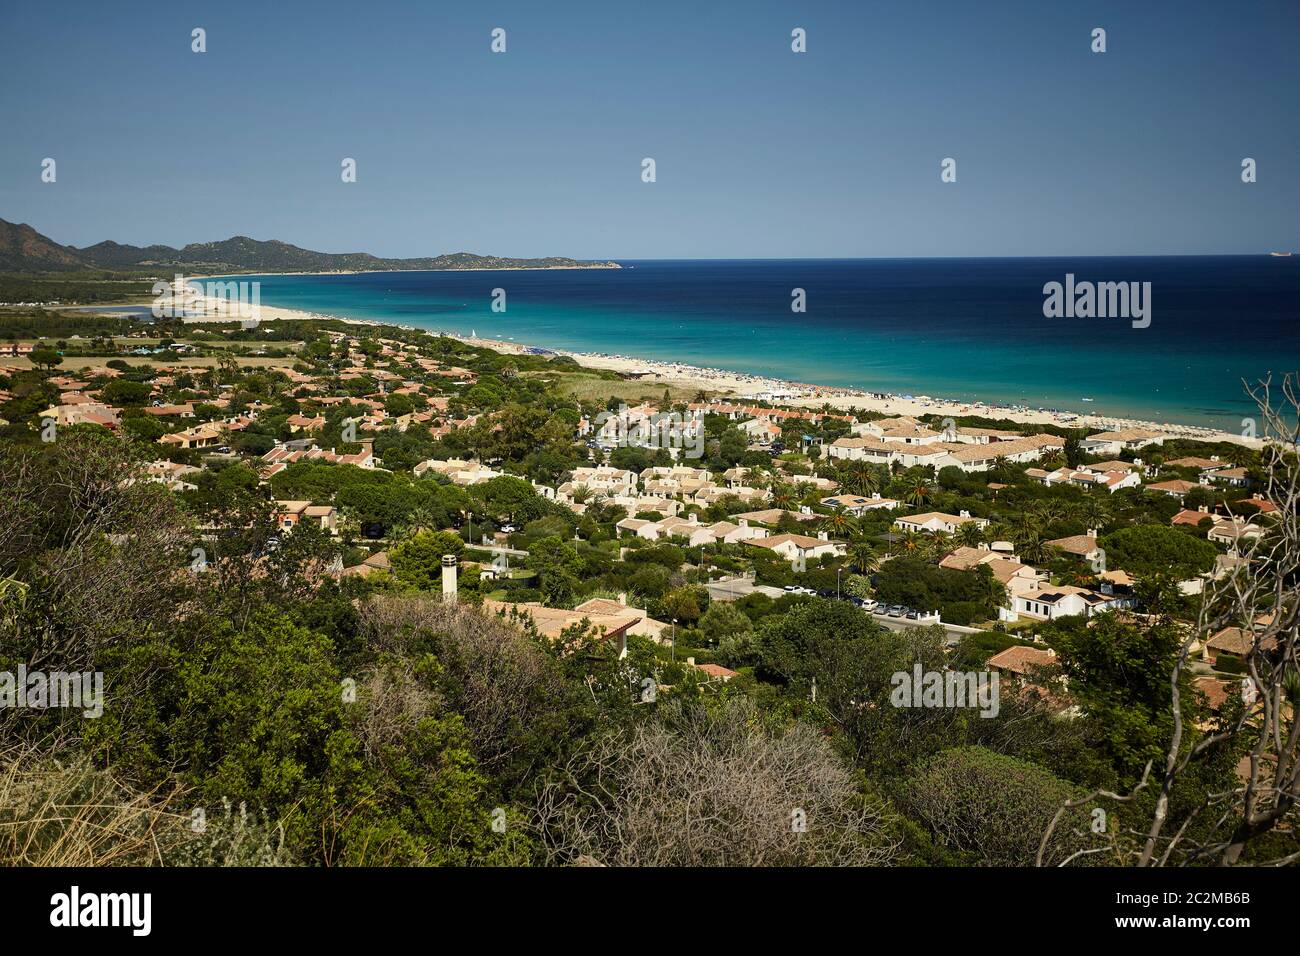 Wonderful view of the village of Costa Rei, a small town in the south of Sardinia, taken from above: the village merges with the beach and the blue se Stock Photo